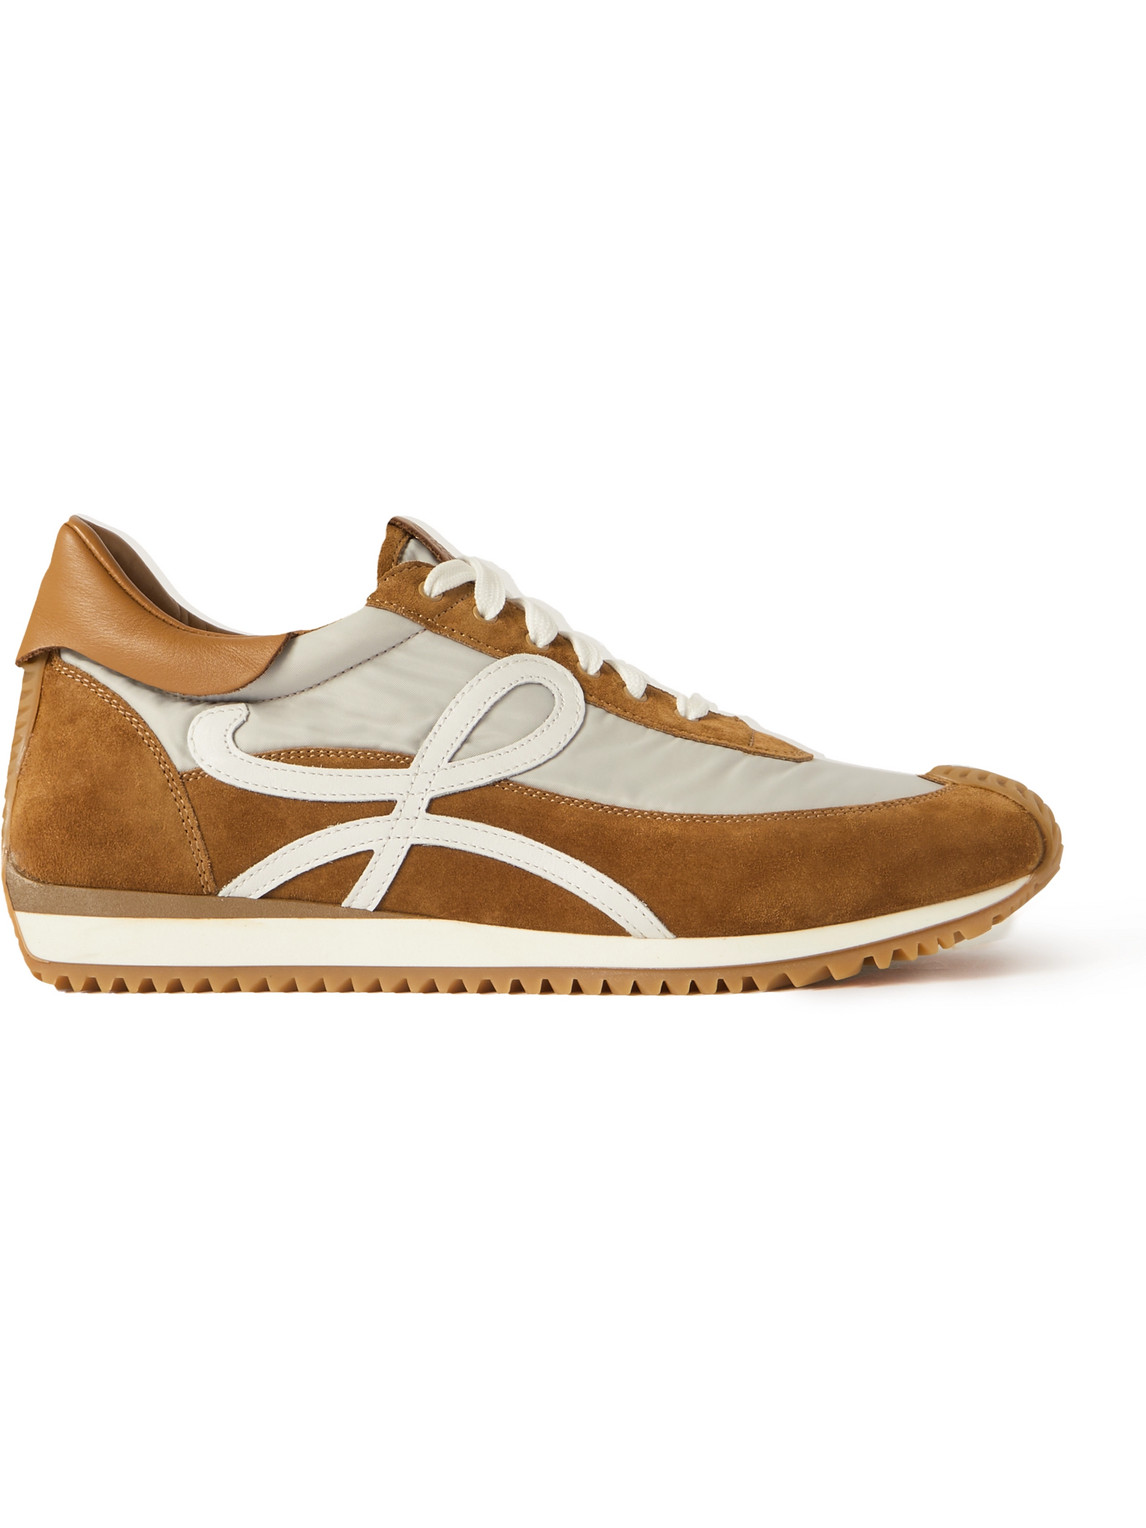 LOEWE FLOW RUNNER LEATHER-TRIMMED SUEDE AND NYLON SNEAKERS